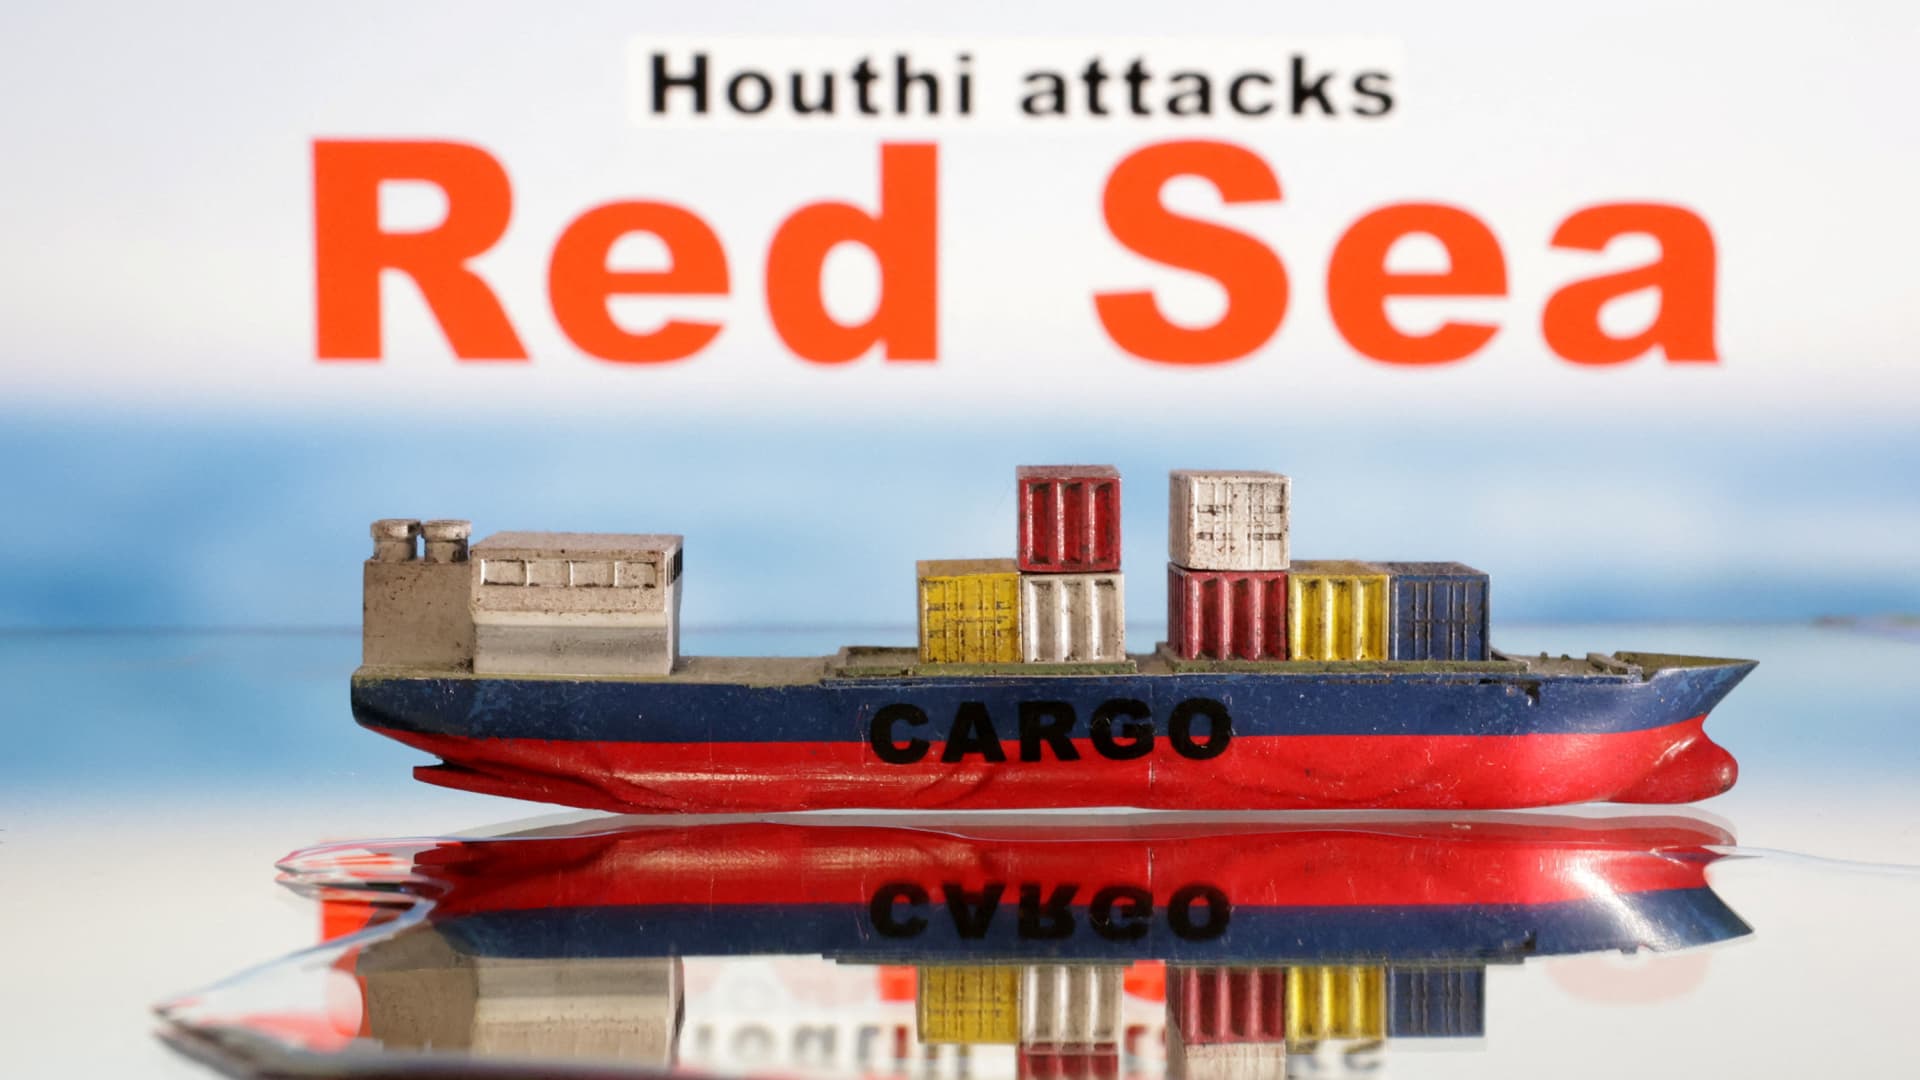 Houthi militias have launched the biggest attack yet on merchant vessels in the Red Sea